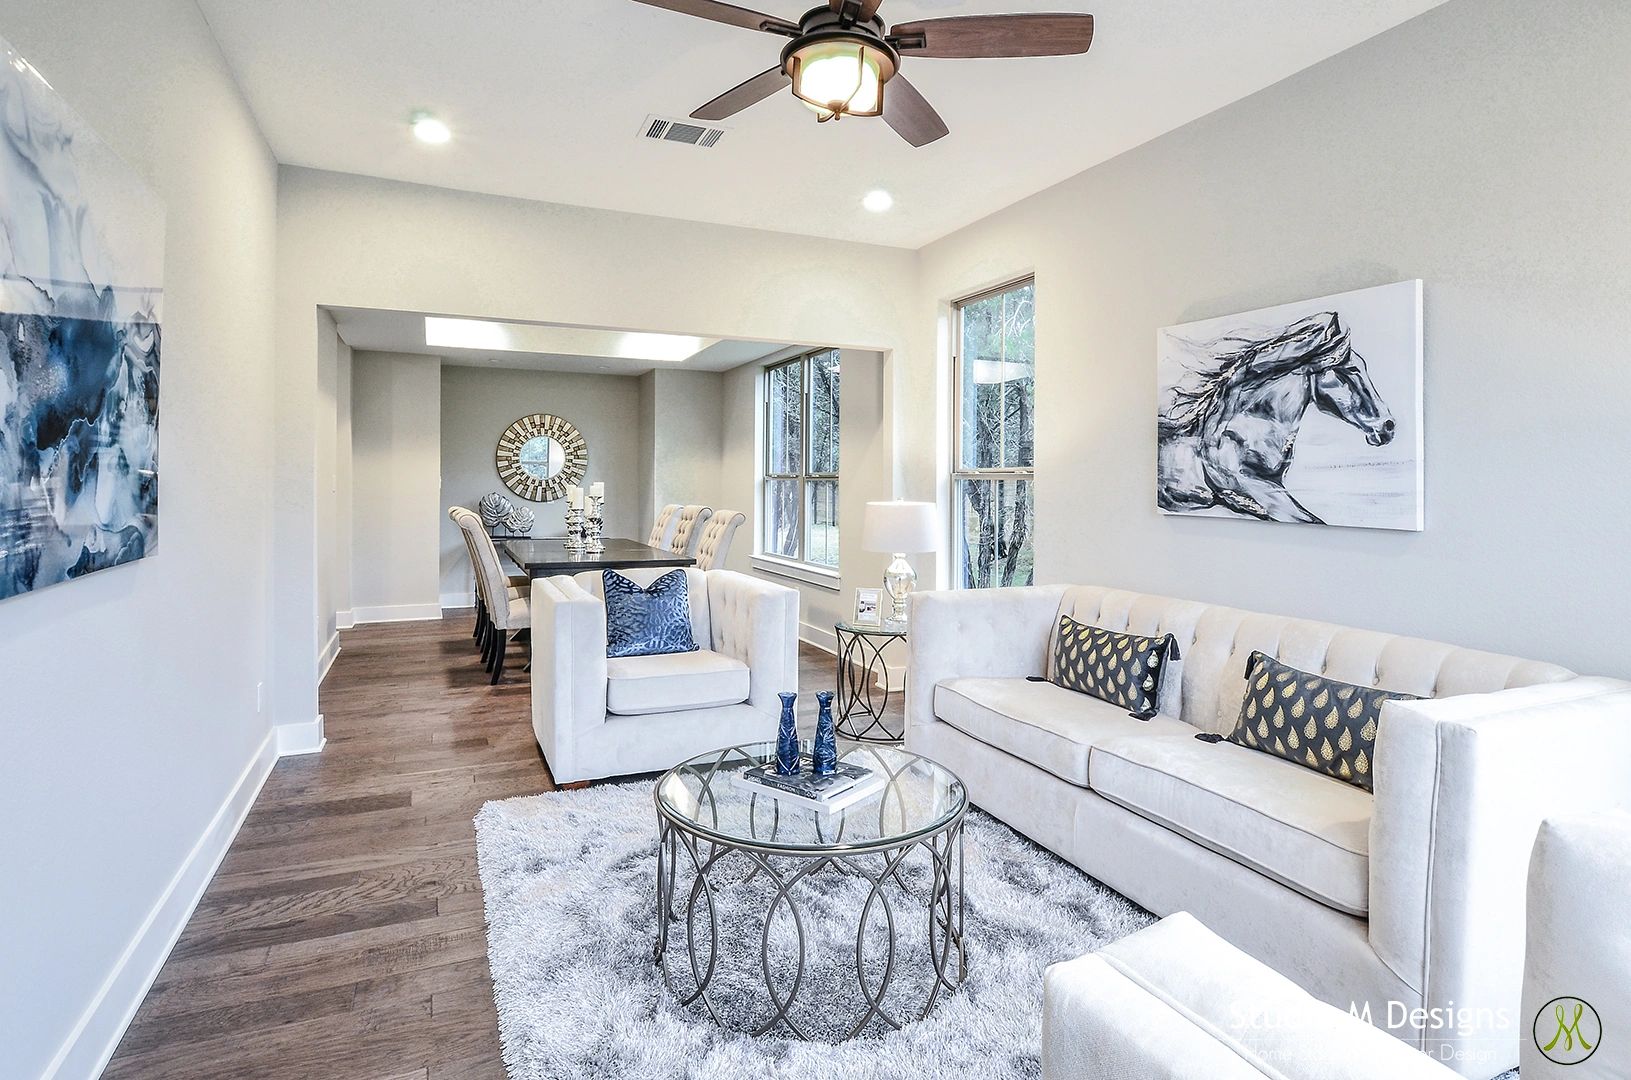 Best model home staging services in Austin 